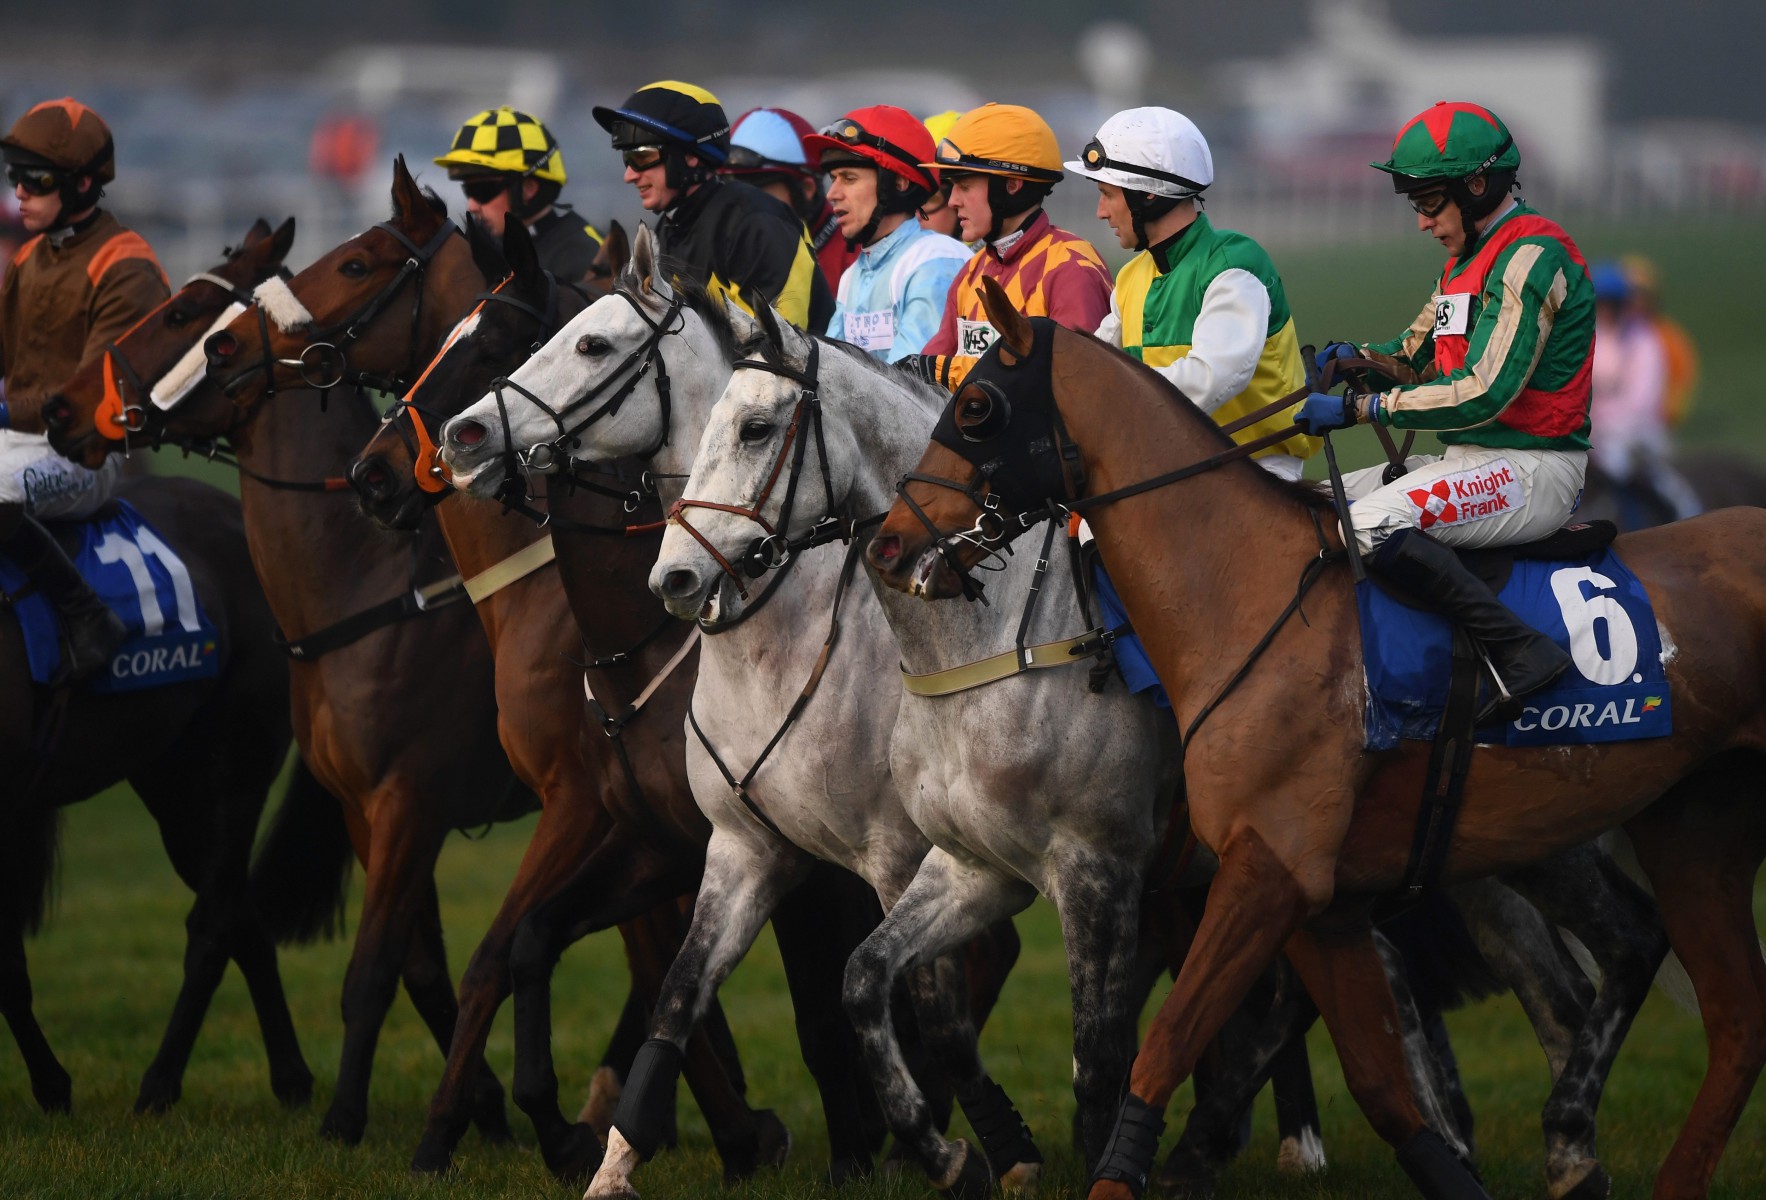 , When is the 2019 Welsh Grand National, what is the prize money, which horse is the favourite and is there a live stream?